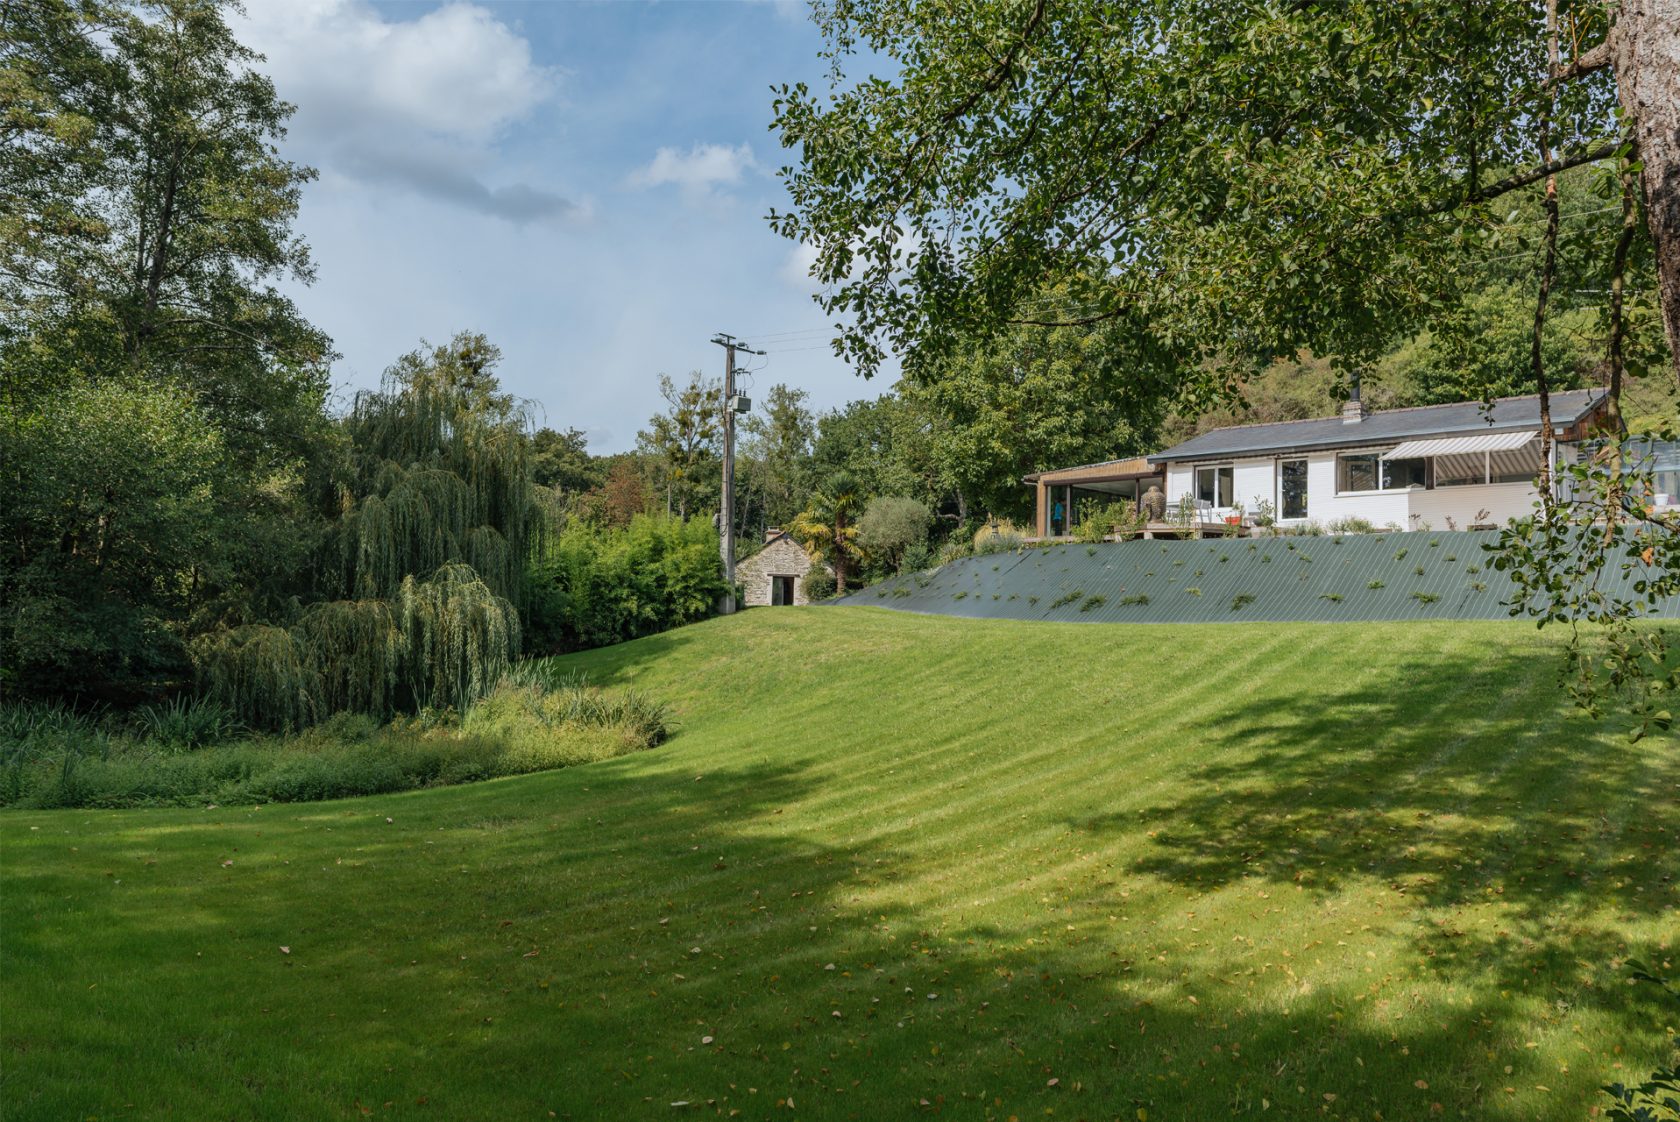 Charming country property and its outbuildings south of Rennes